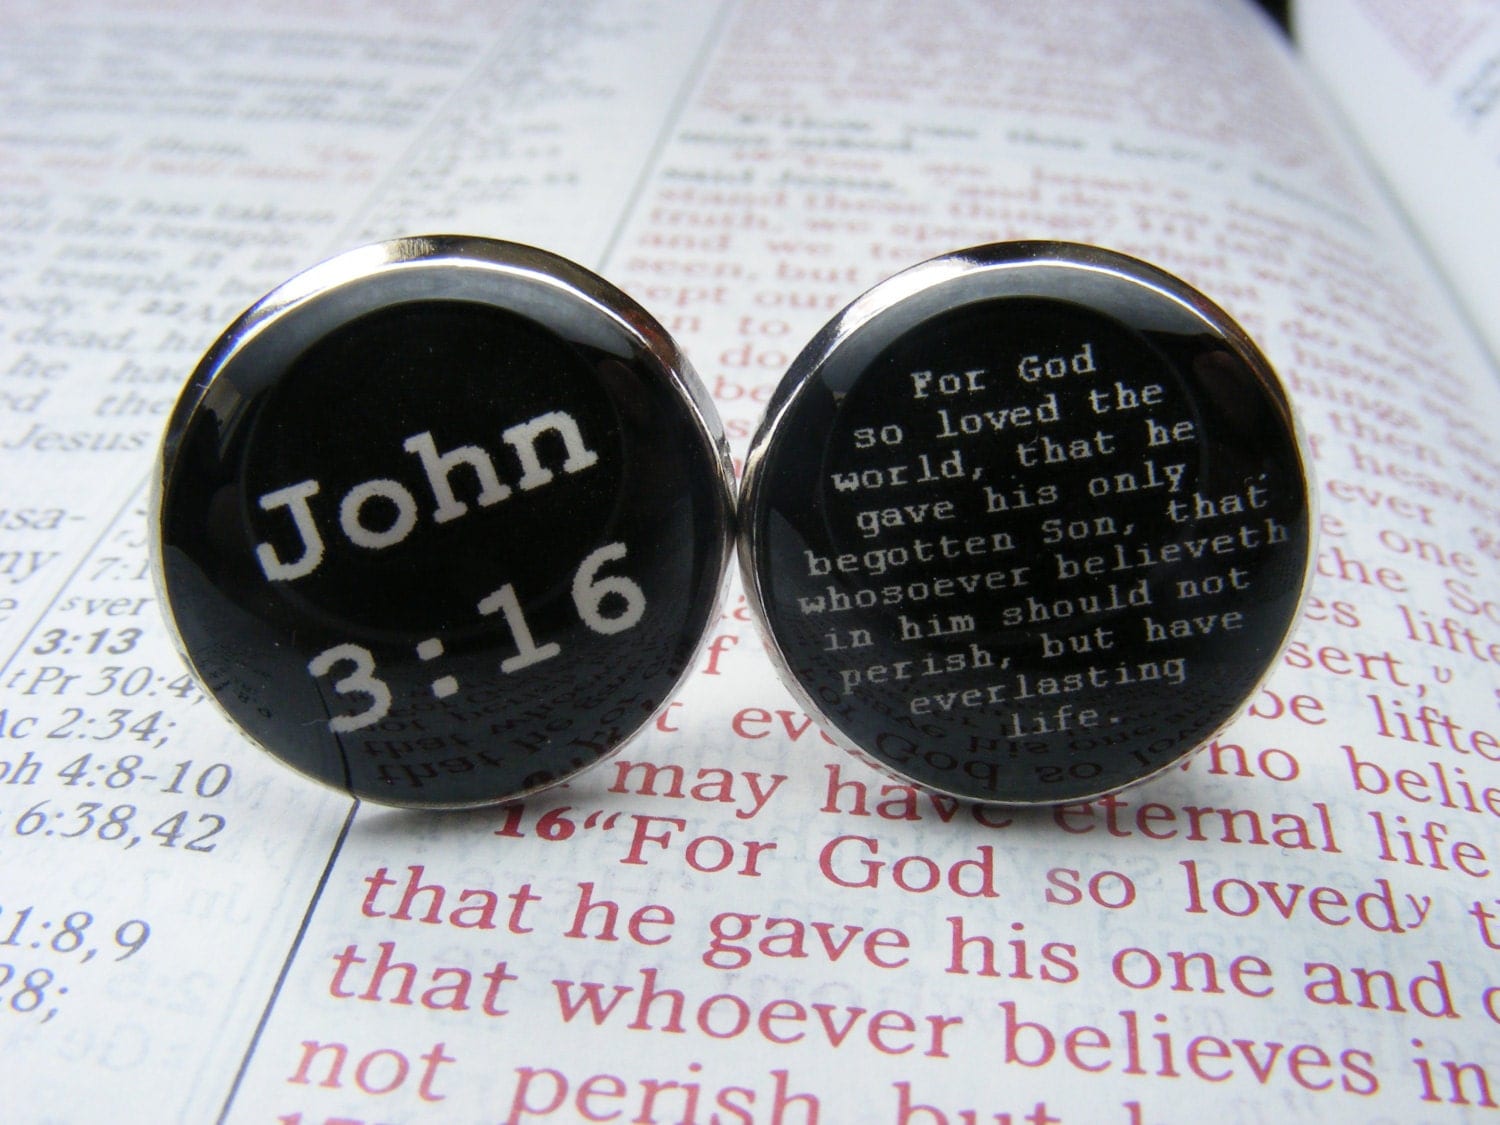 John 3 16 Cufflinks For God so loved the World Bible Verse Religious Quotes Christian Gift Scripture Lutheran Everlasting Life